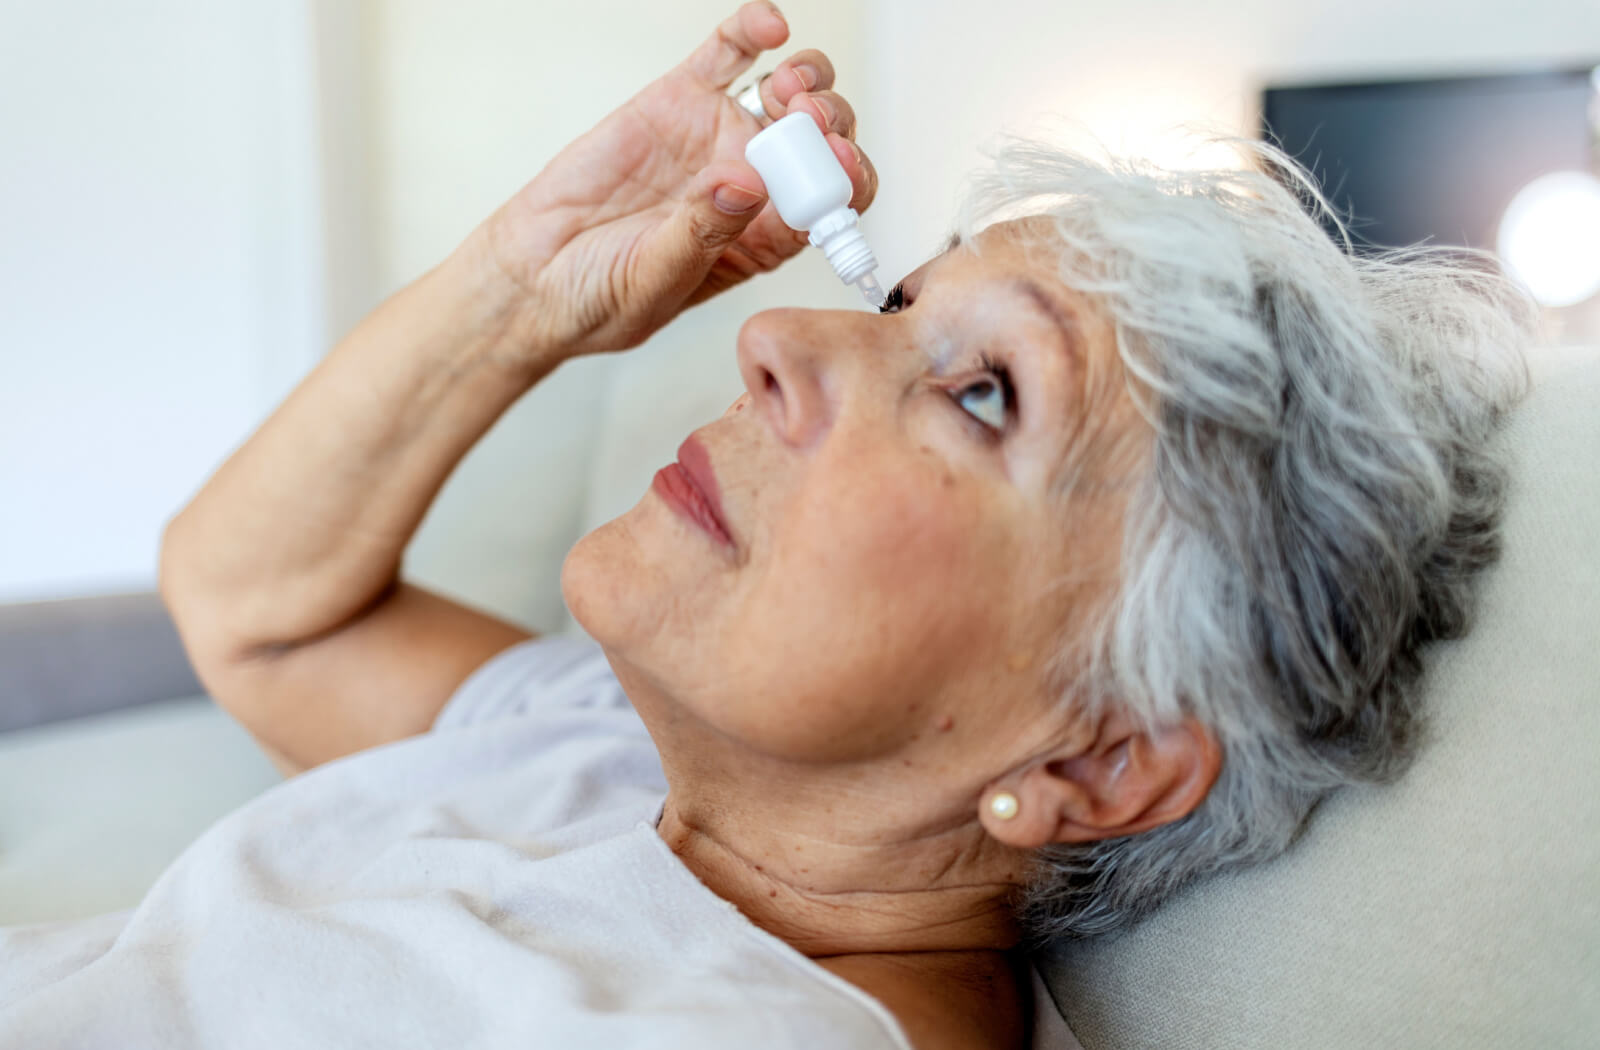 A senior woman leaning back to apply eye drops on her right eye.